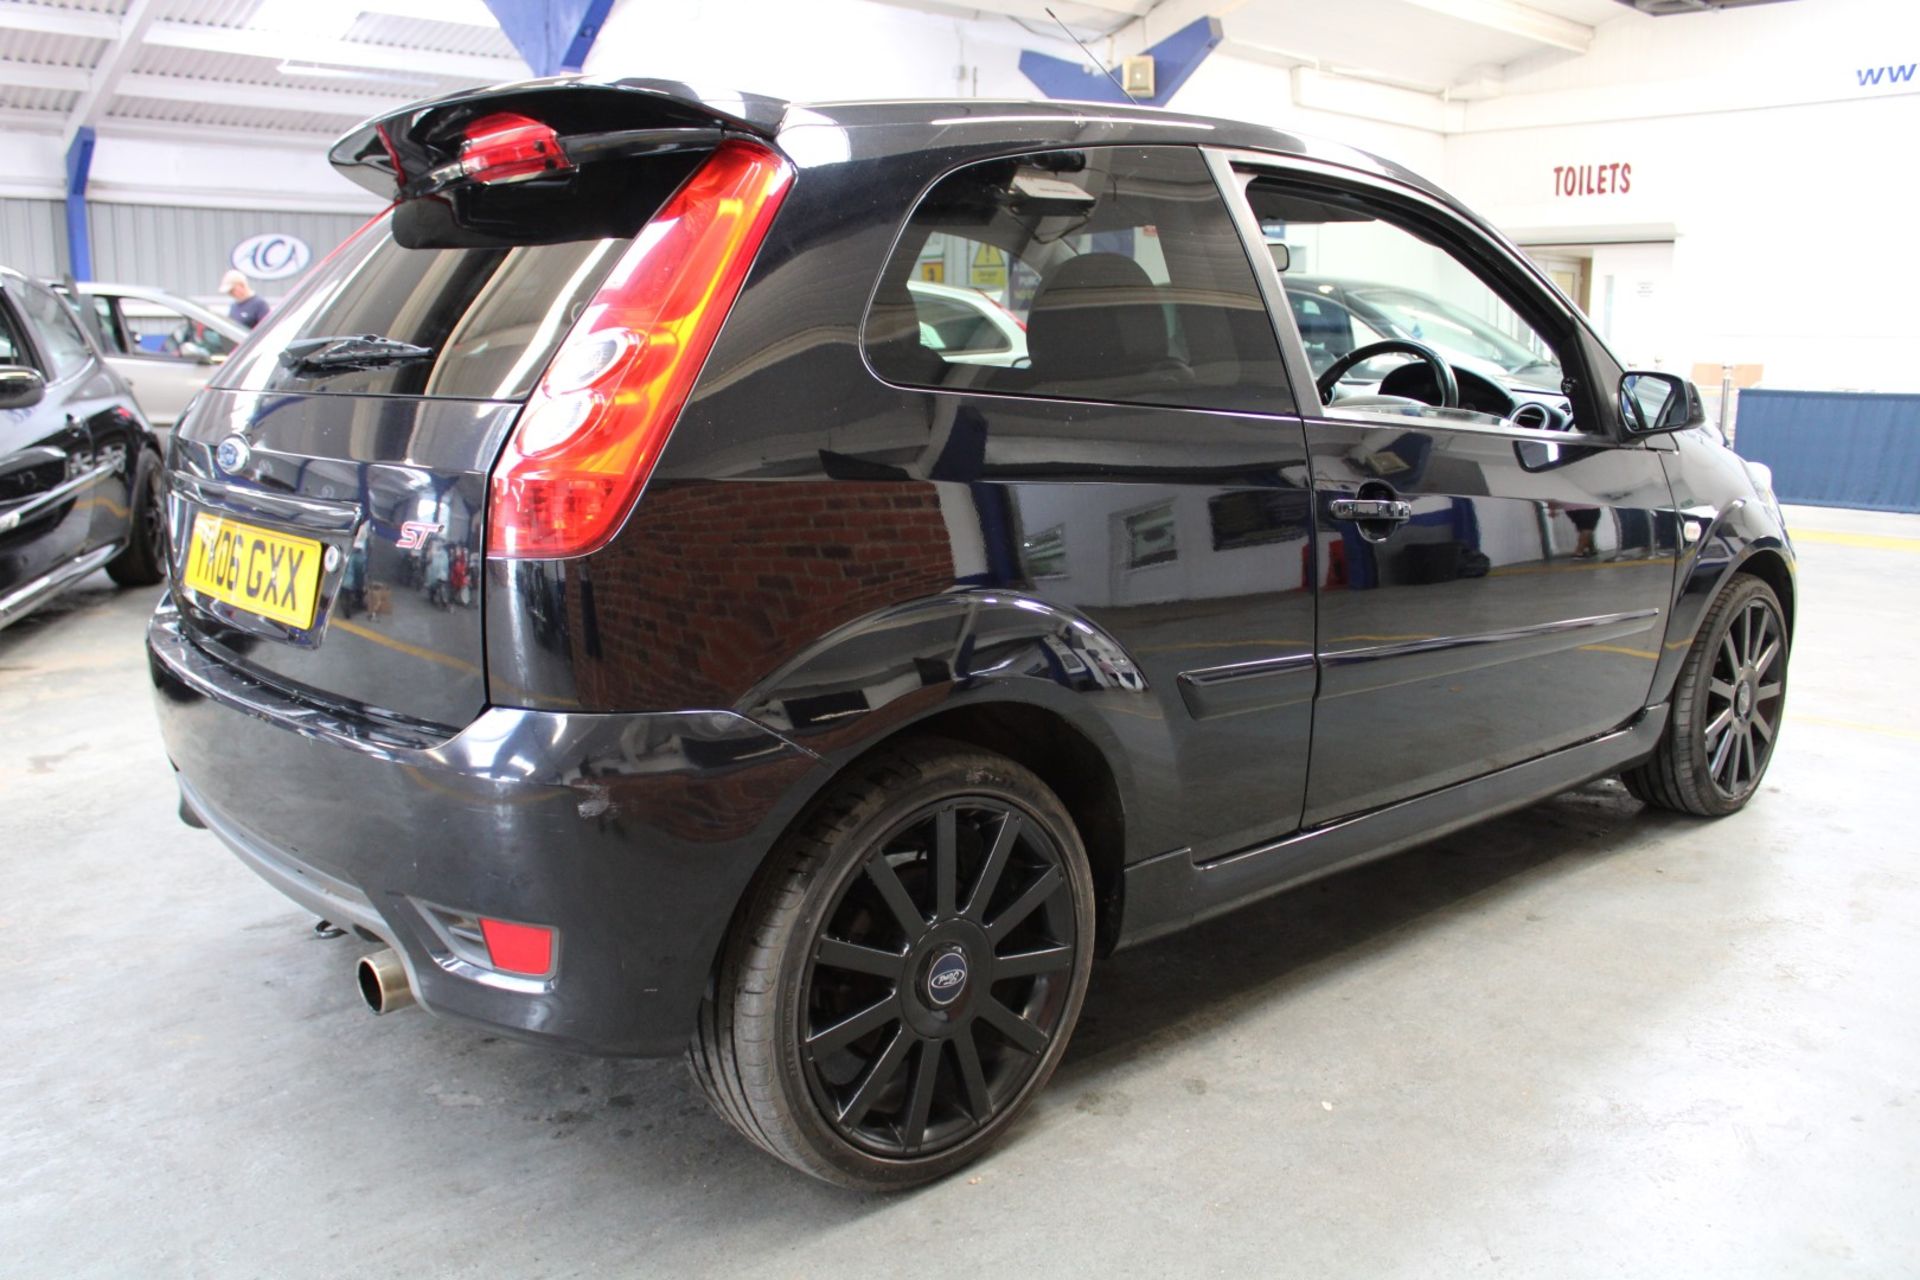 06 06 Ford Fiesta ST - Image 21 of 27